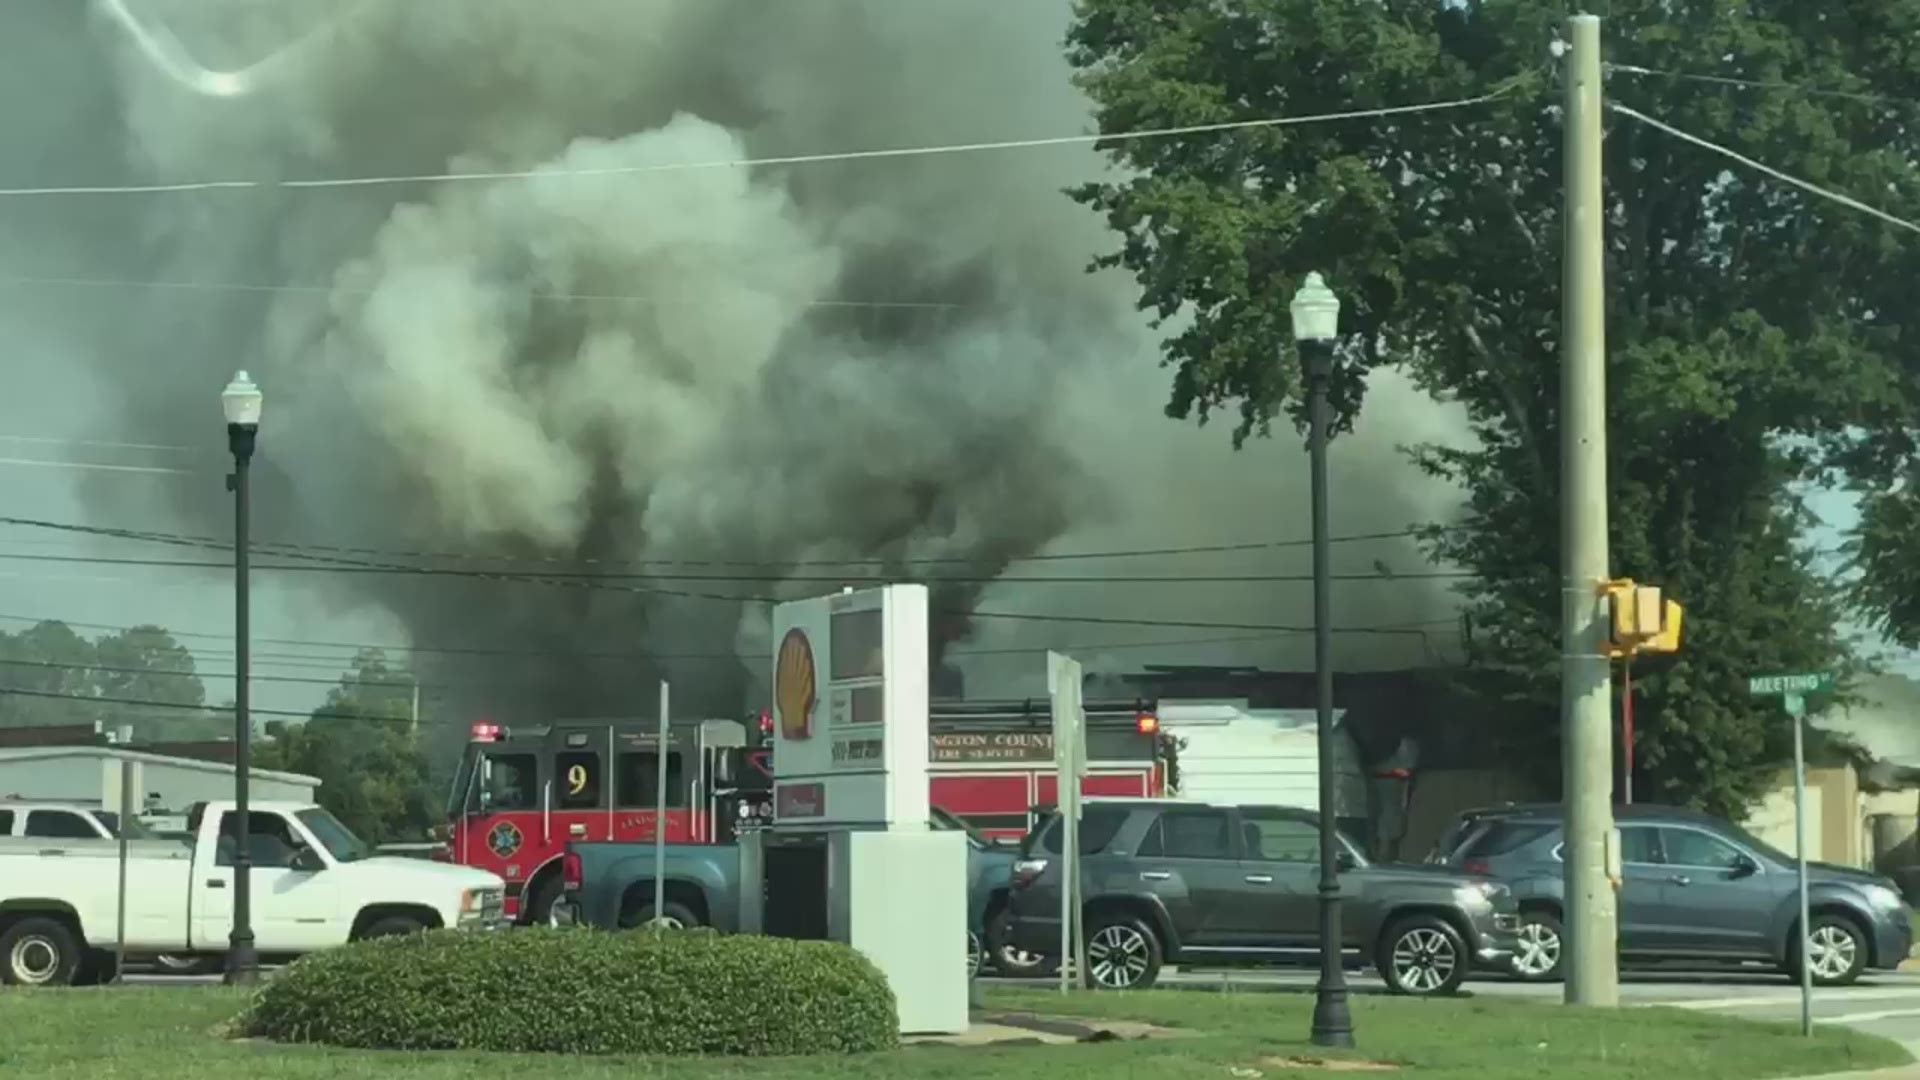 The fire is near the intersection of Meeting Street and 12th Street in West Columbia.